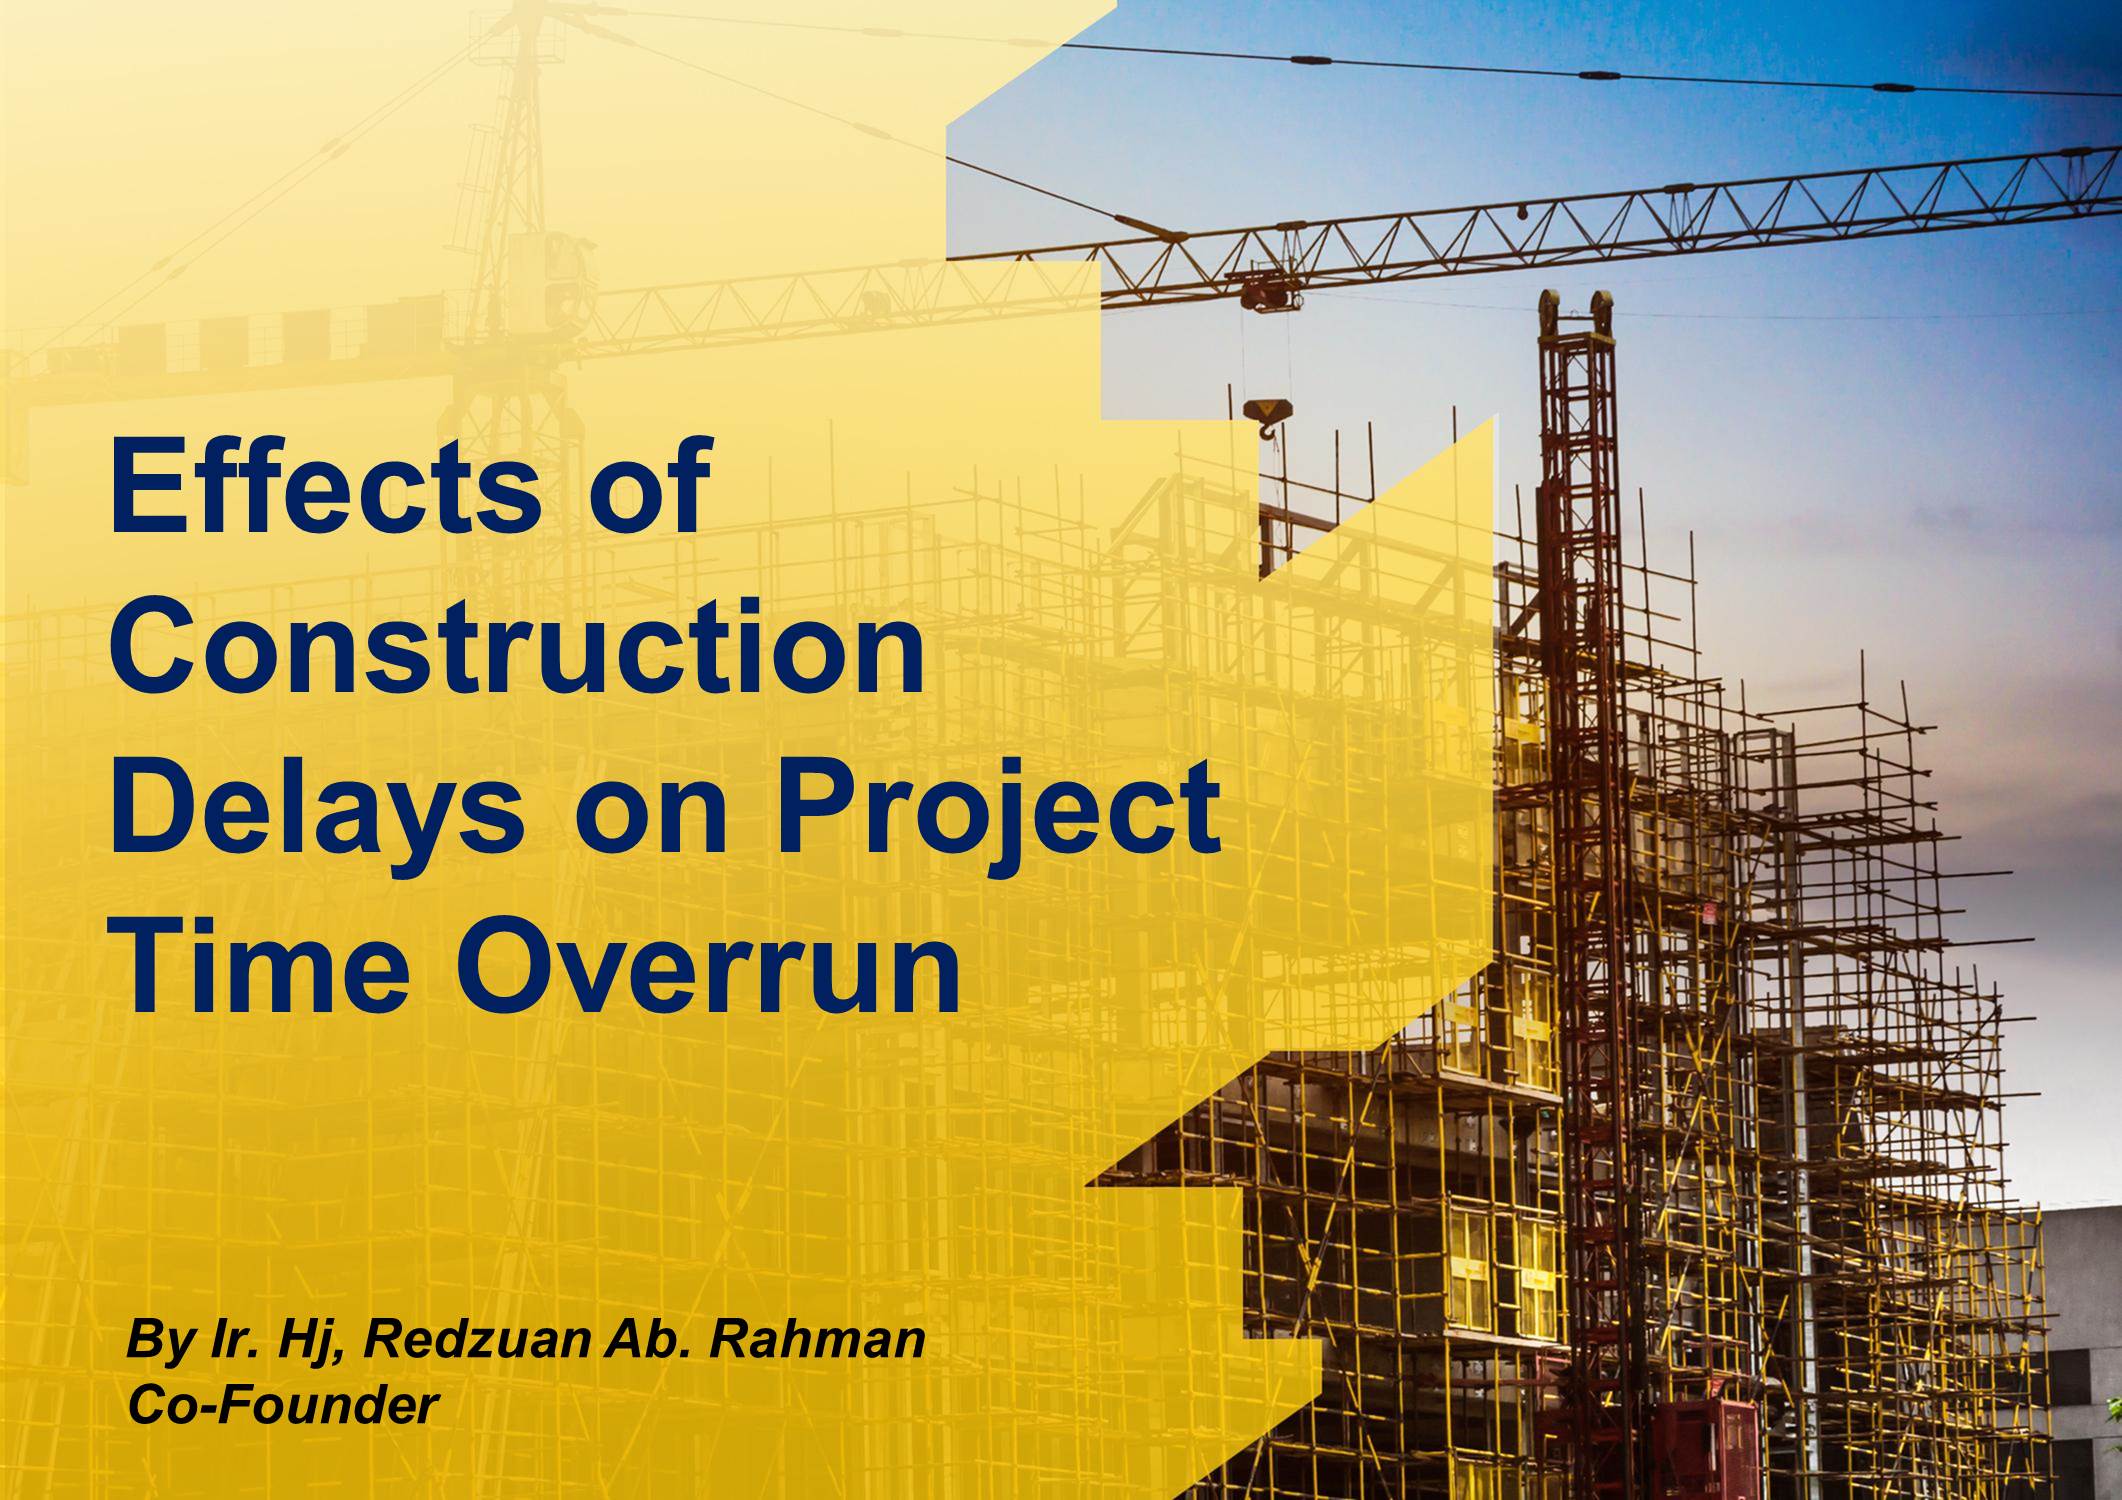 Effects of Construction Delays on Project Time Overrun